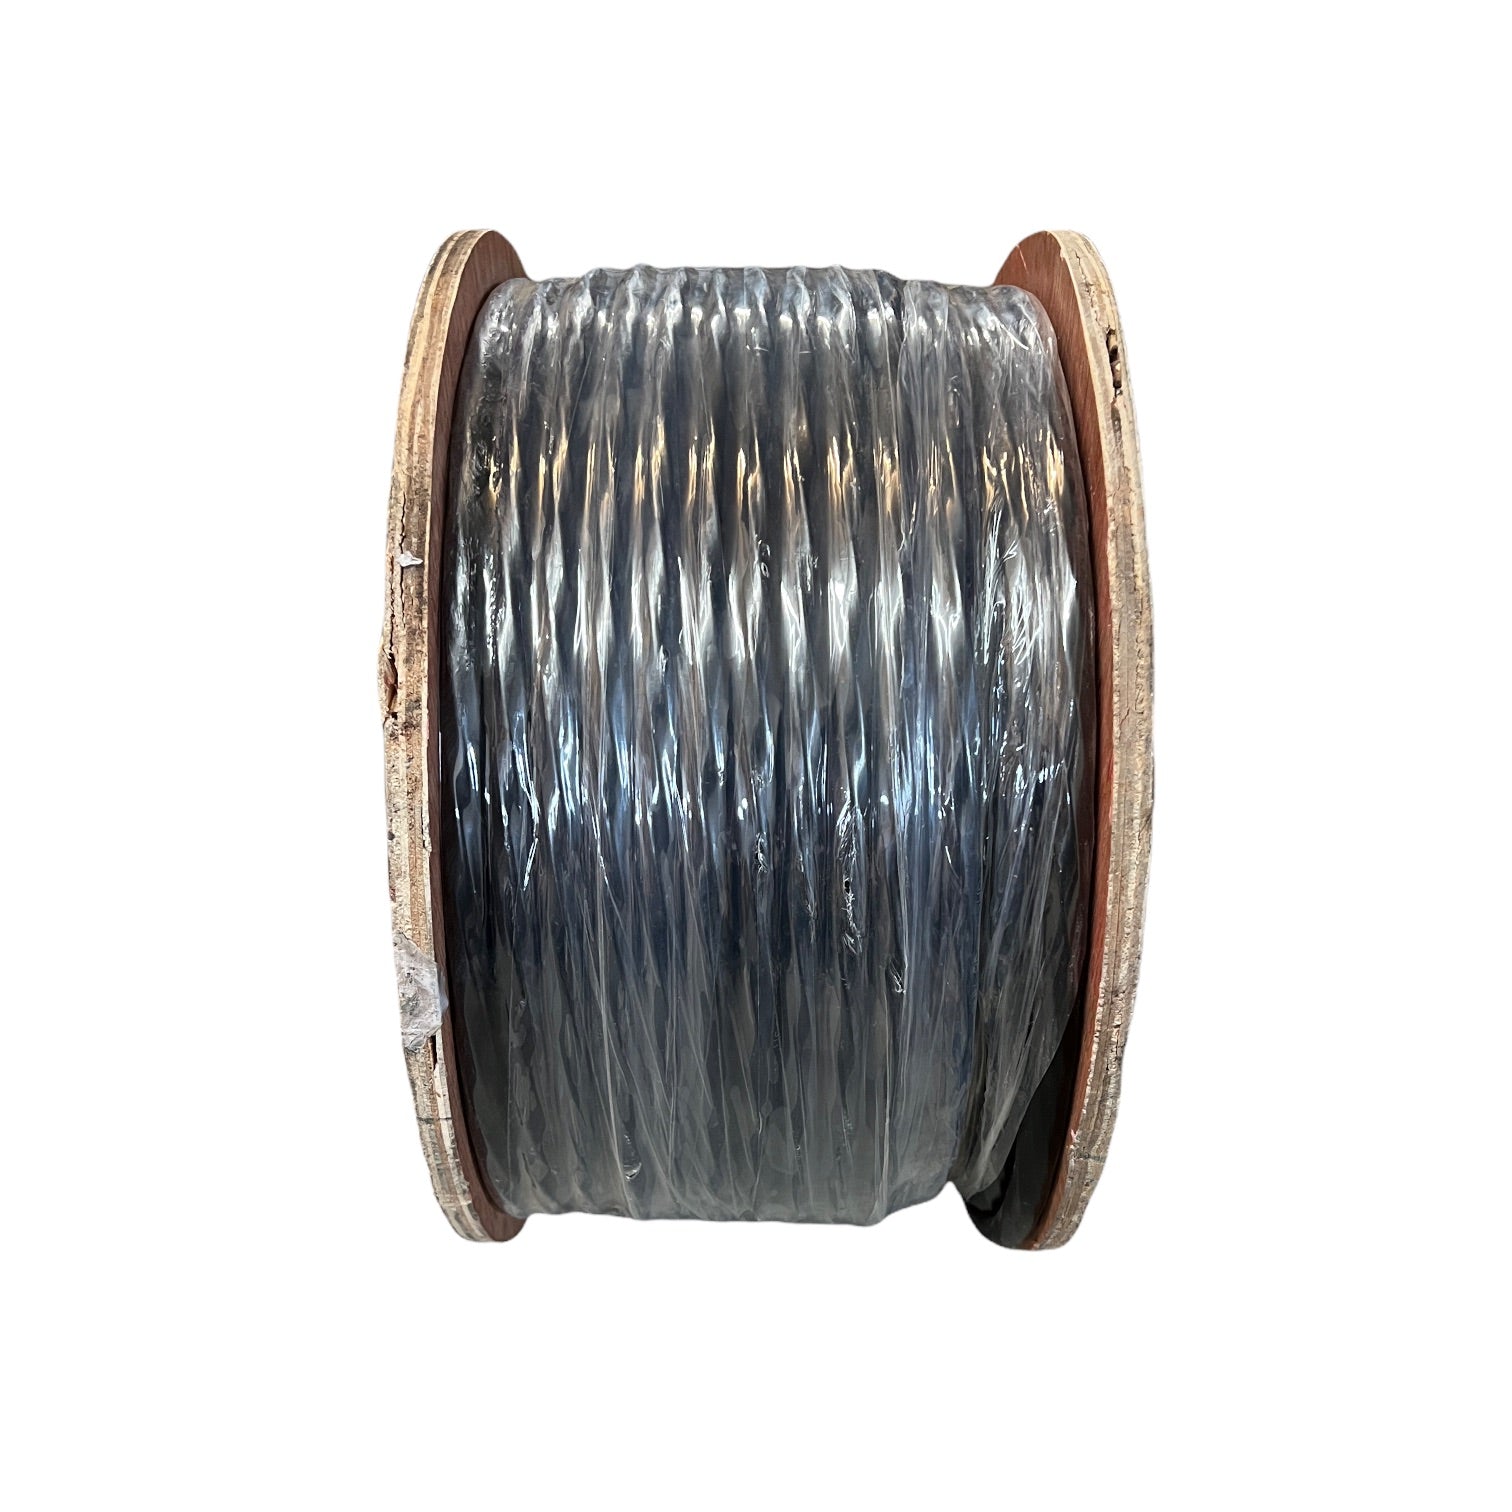 18/13X500 - Multi-Conductor Irrigation Control Wire, 18 awg, 18/13 X 500 ft